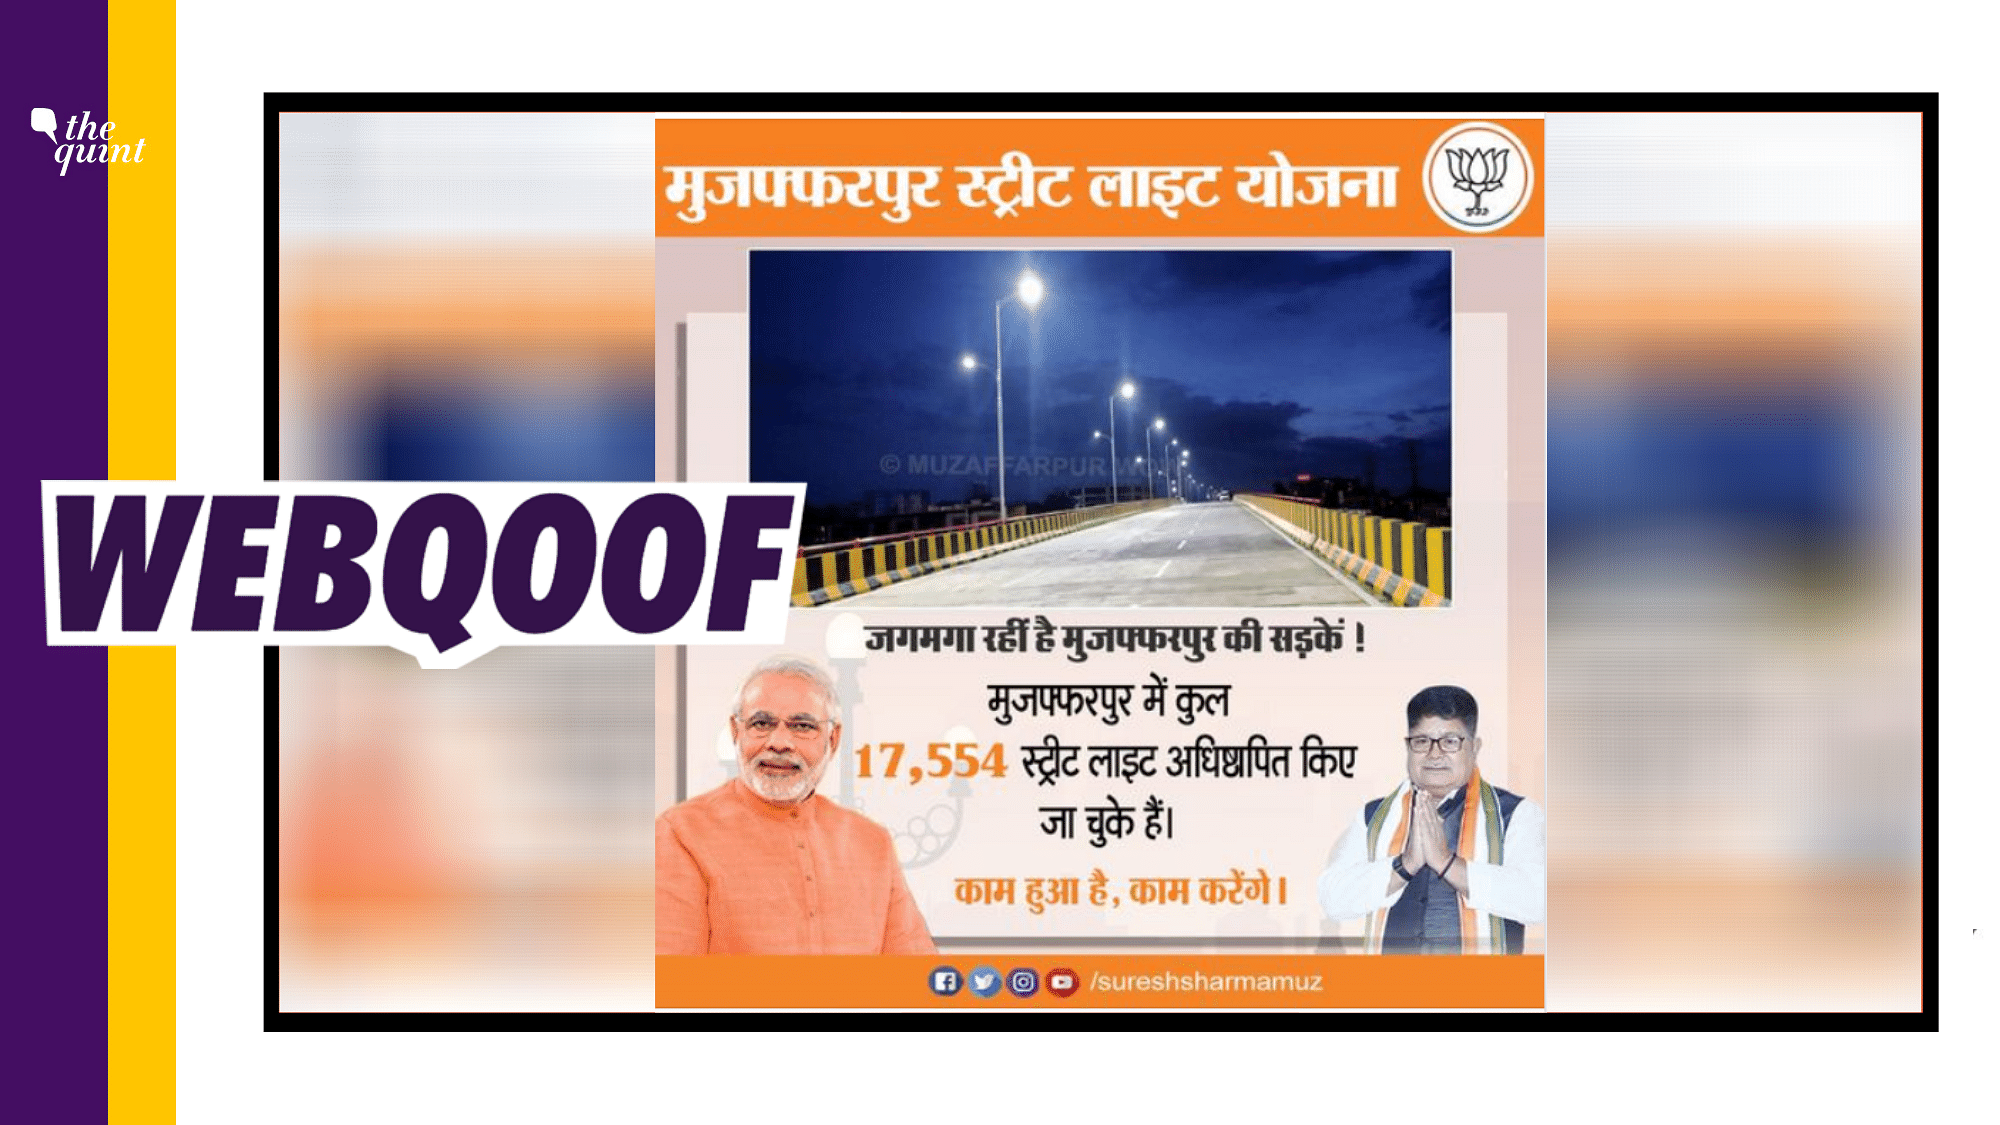 The photograph, that the Bihar minister shared, was actually that of a flyover in Hyderabad, Telangana that was inaugurated in August 2020.